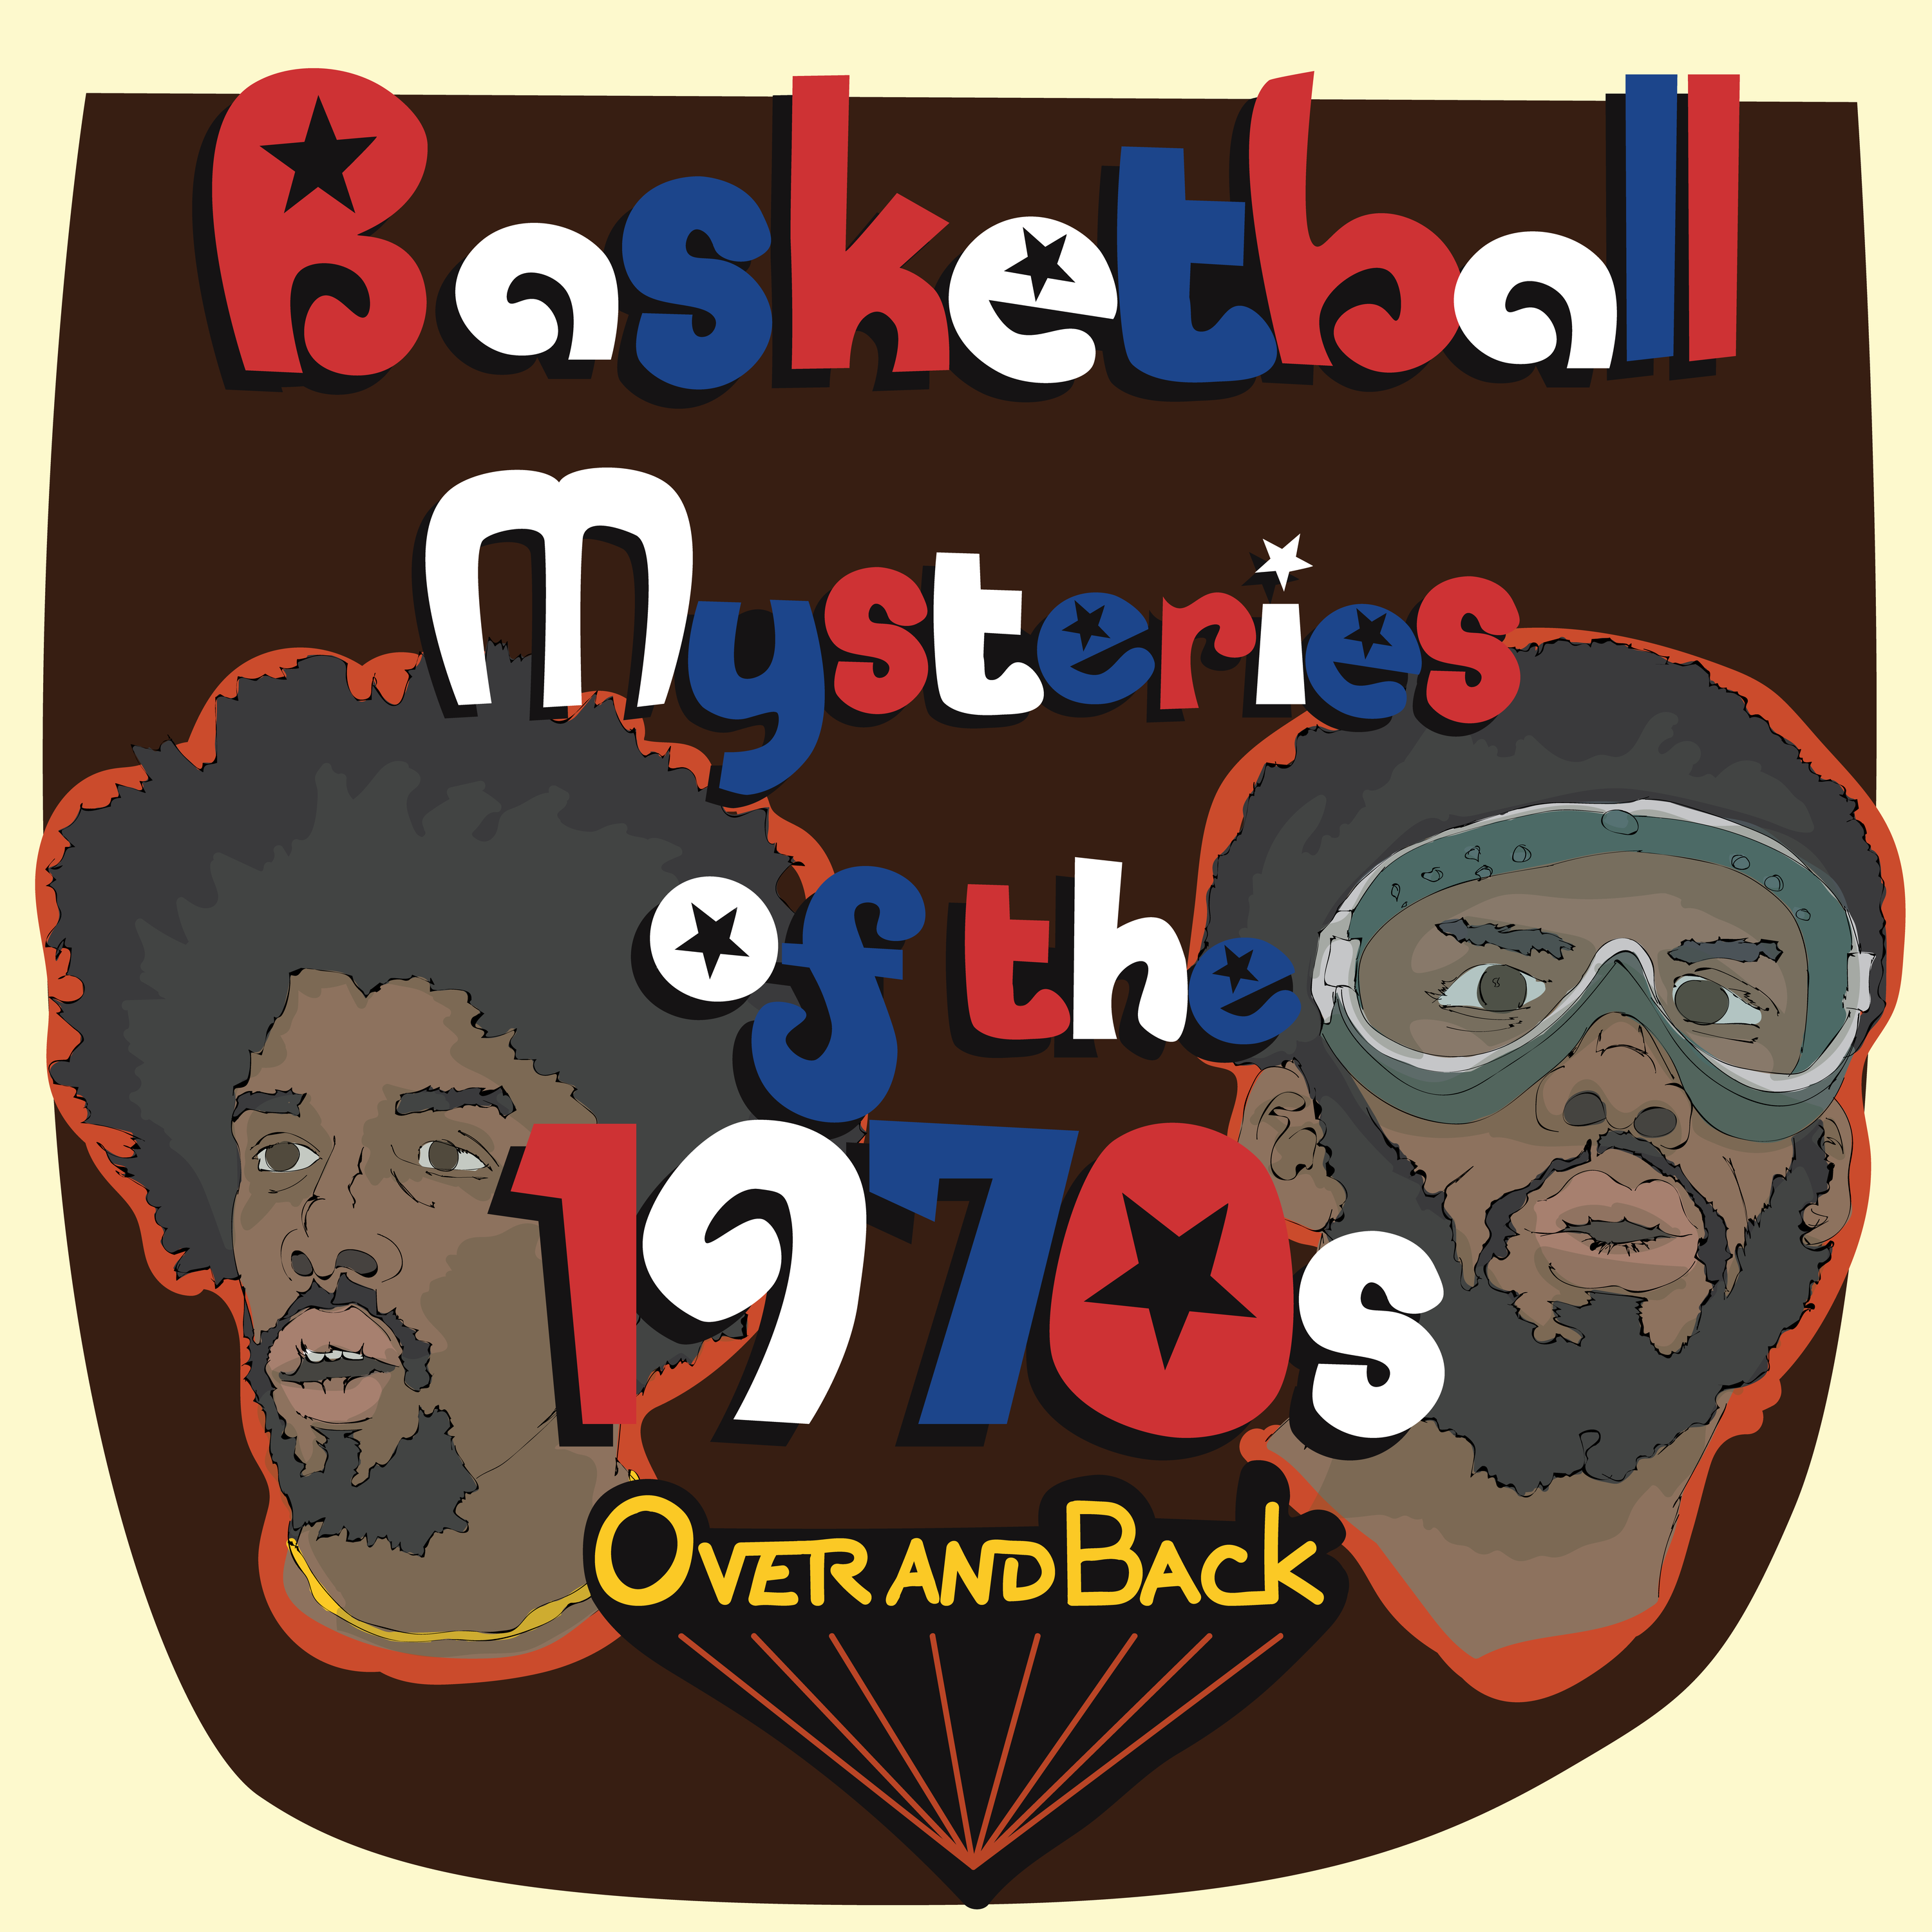 What 1970s trades were the boldest? (Basketball Mysteries of the 1970s #8)